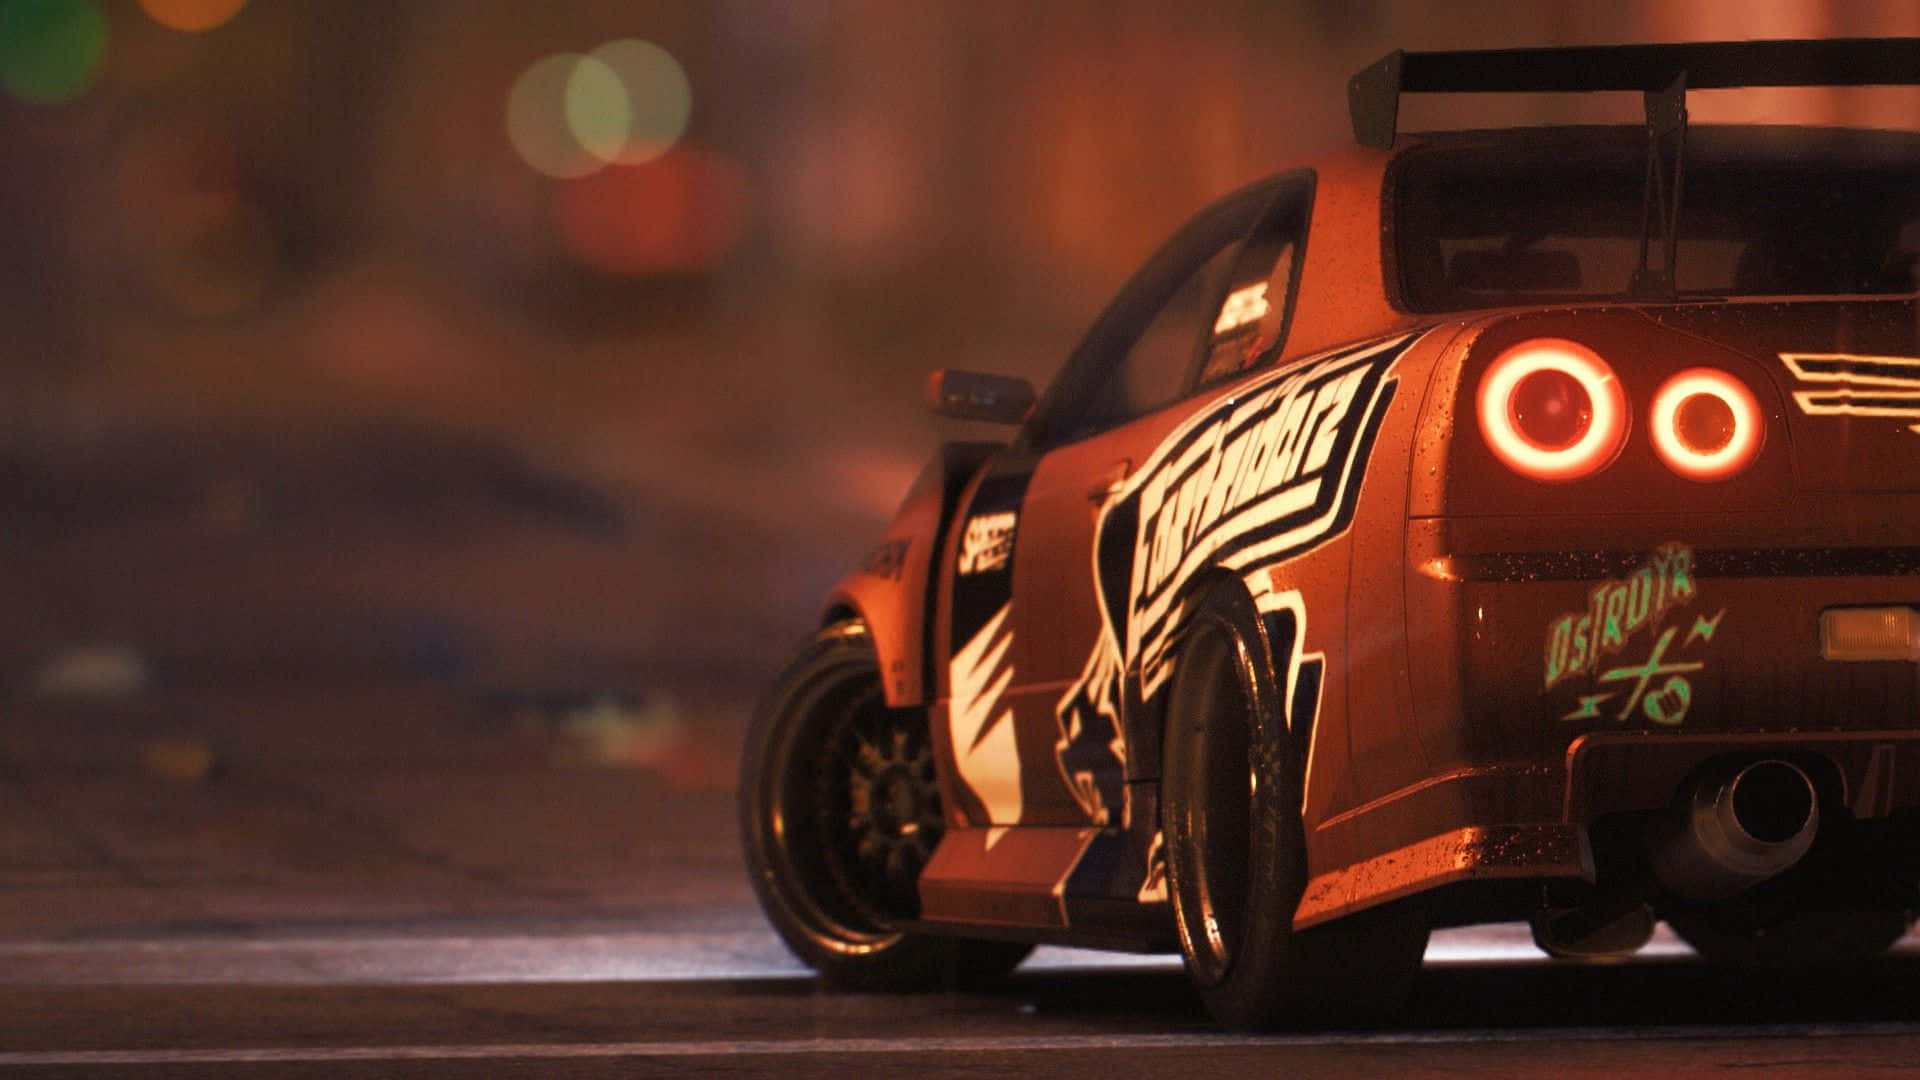 Raseschnell Mit Need For Speed Pc. Wallpaper